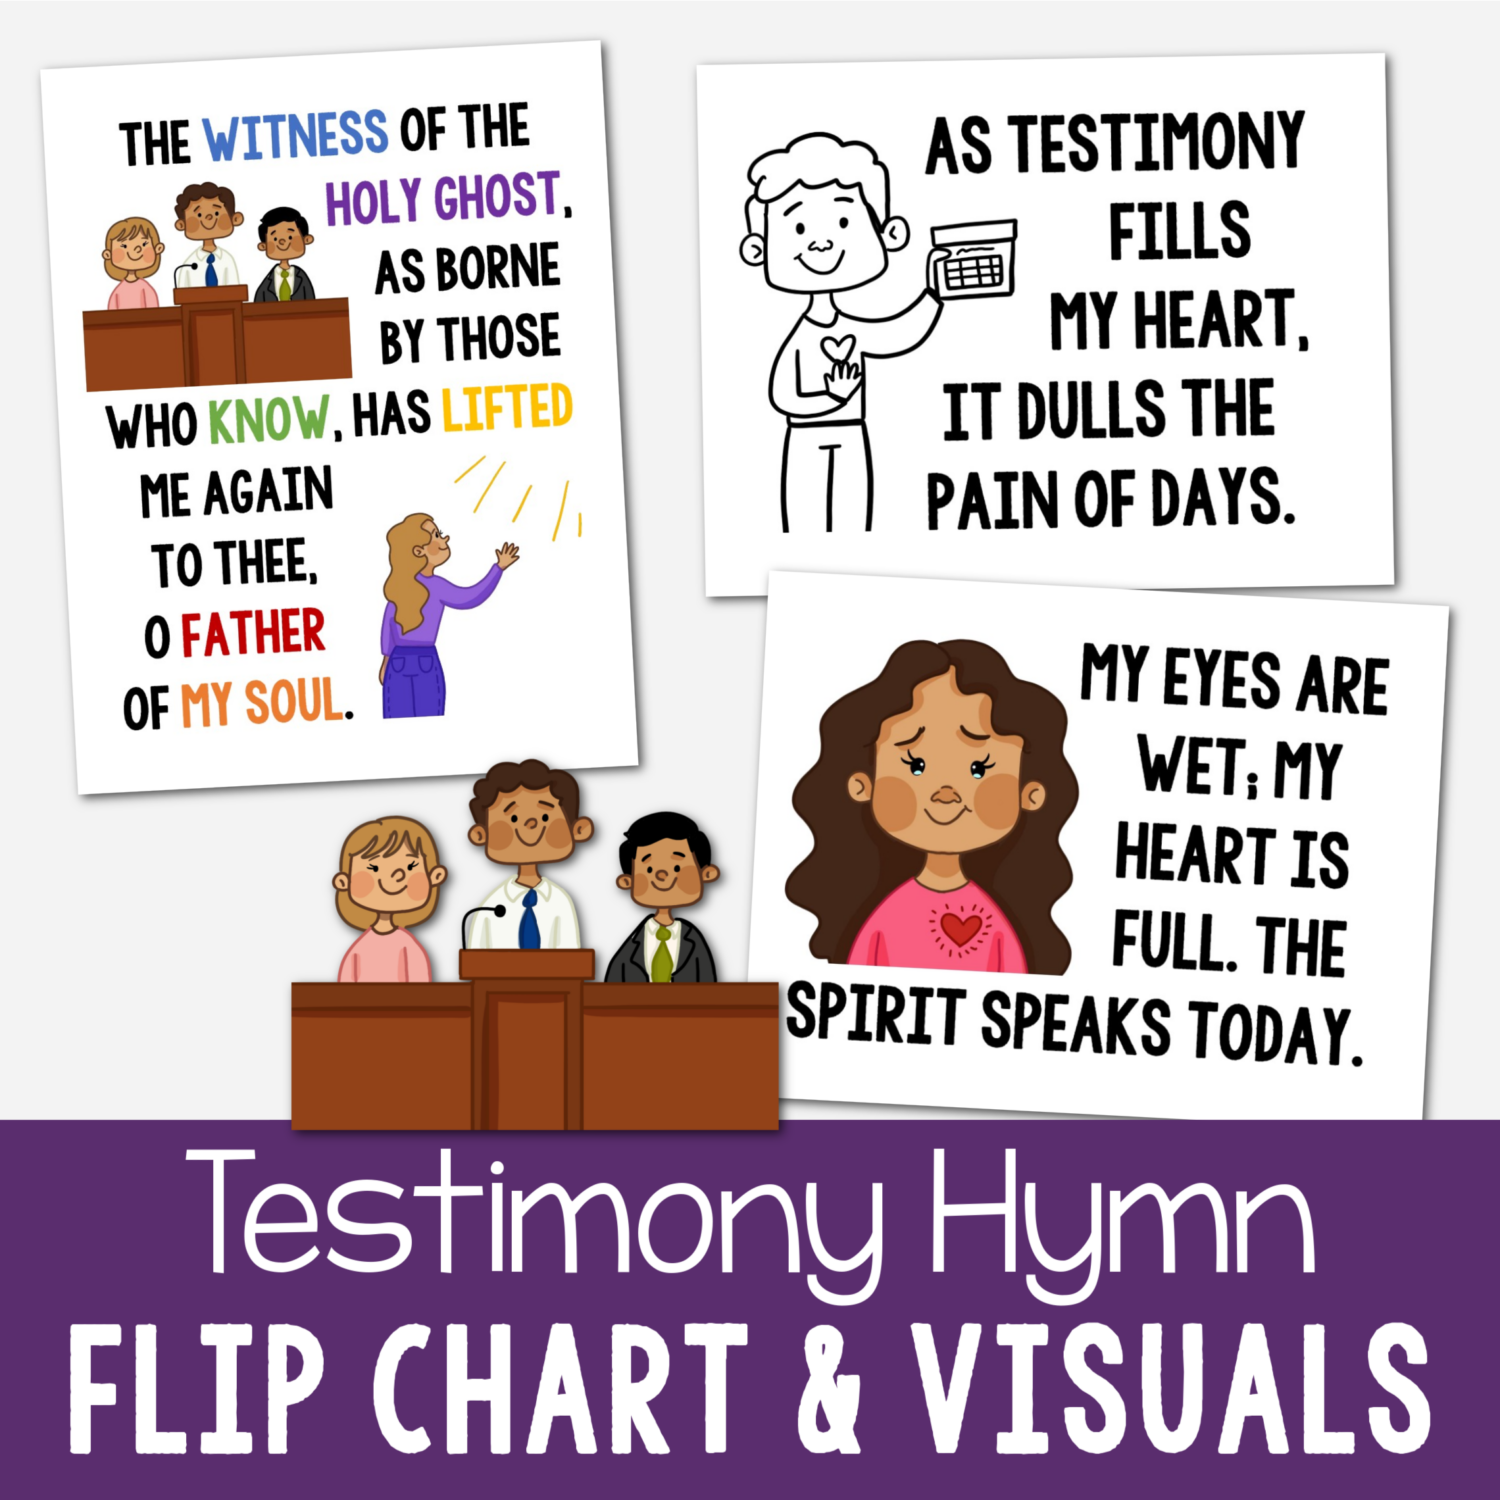 Testimony flip chart and visual aids for LDS Primary music leaders singing time teaching helps with illustrations and lyrics to help teach this song! A Book of Mormon Come Follow Me song pick!